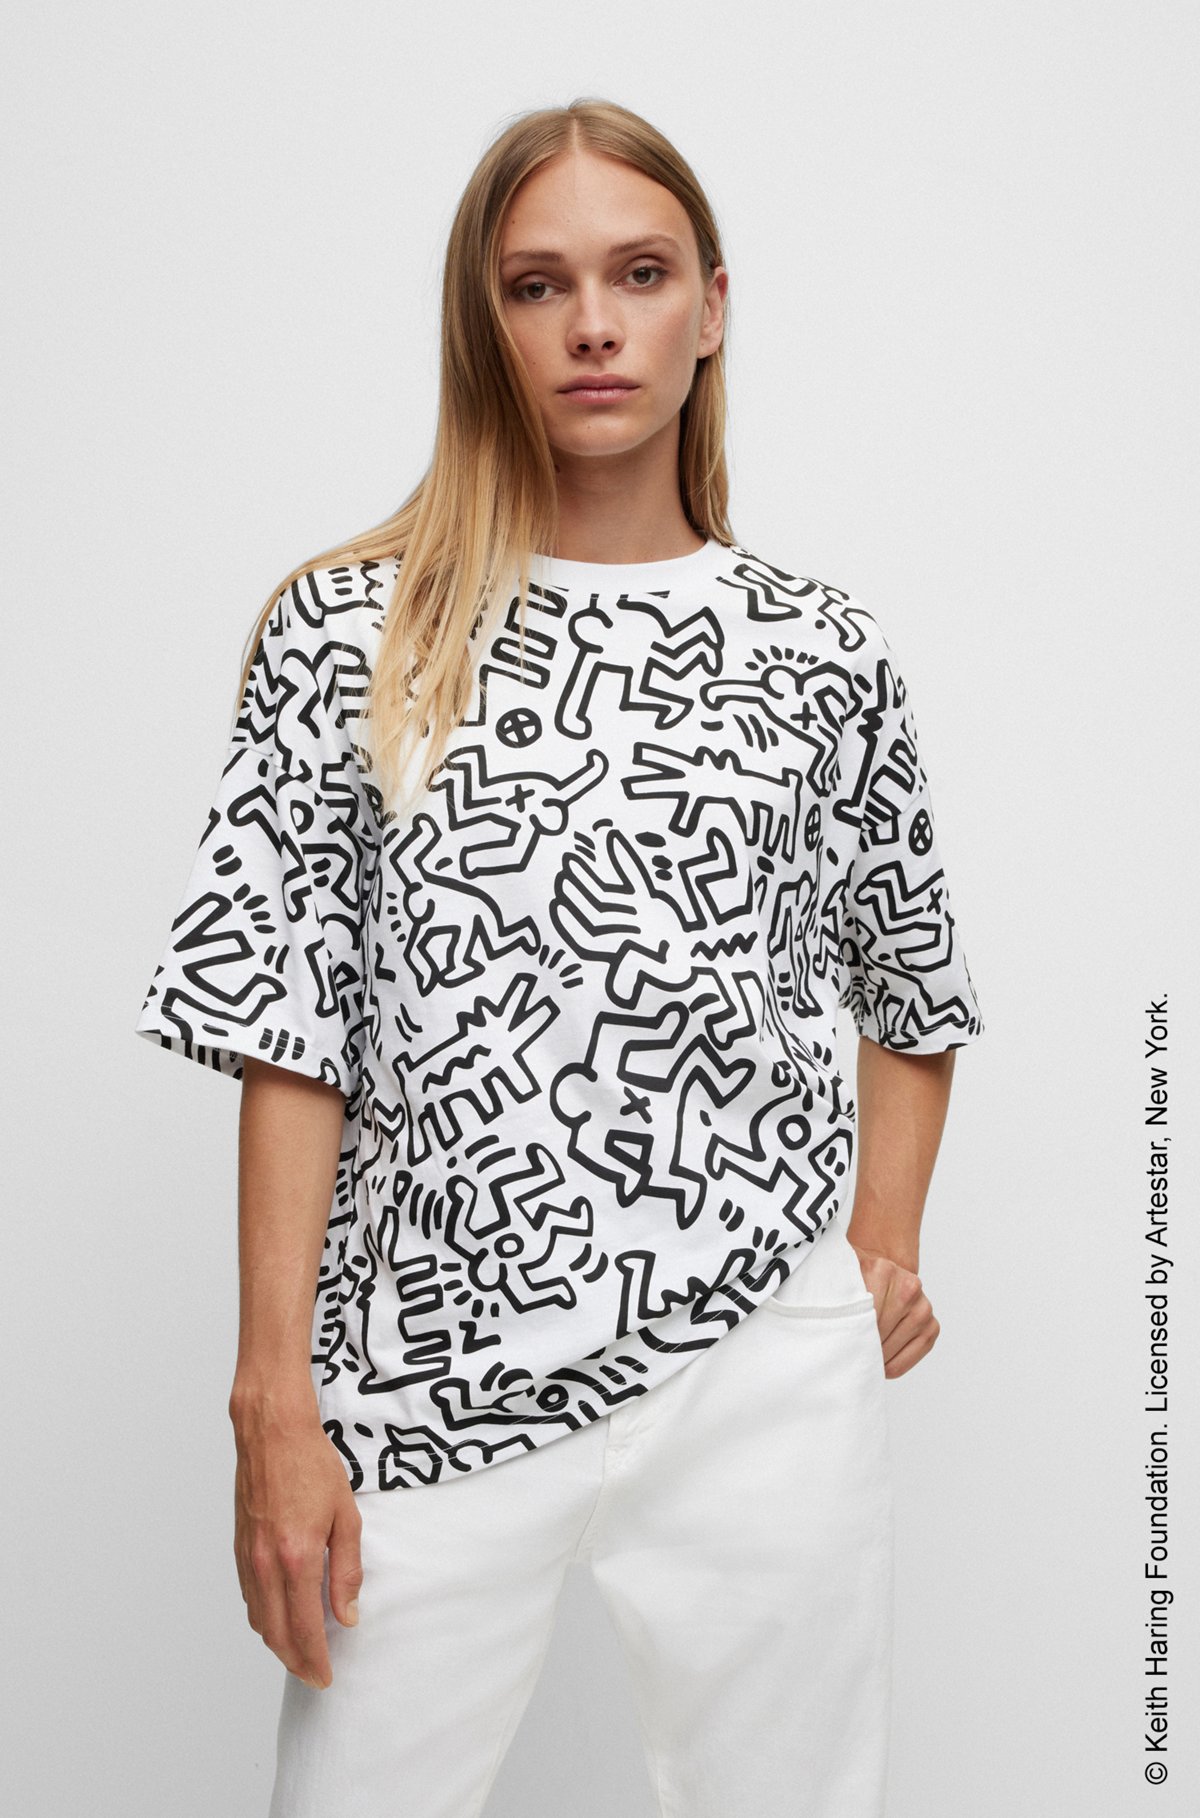 BOSS x Keith Haring gender-neutral graphic T-shirt in cotton jersey